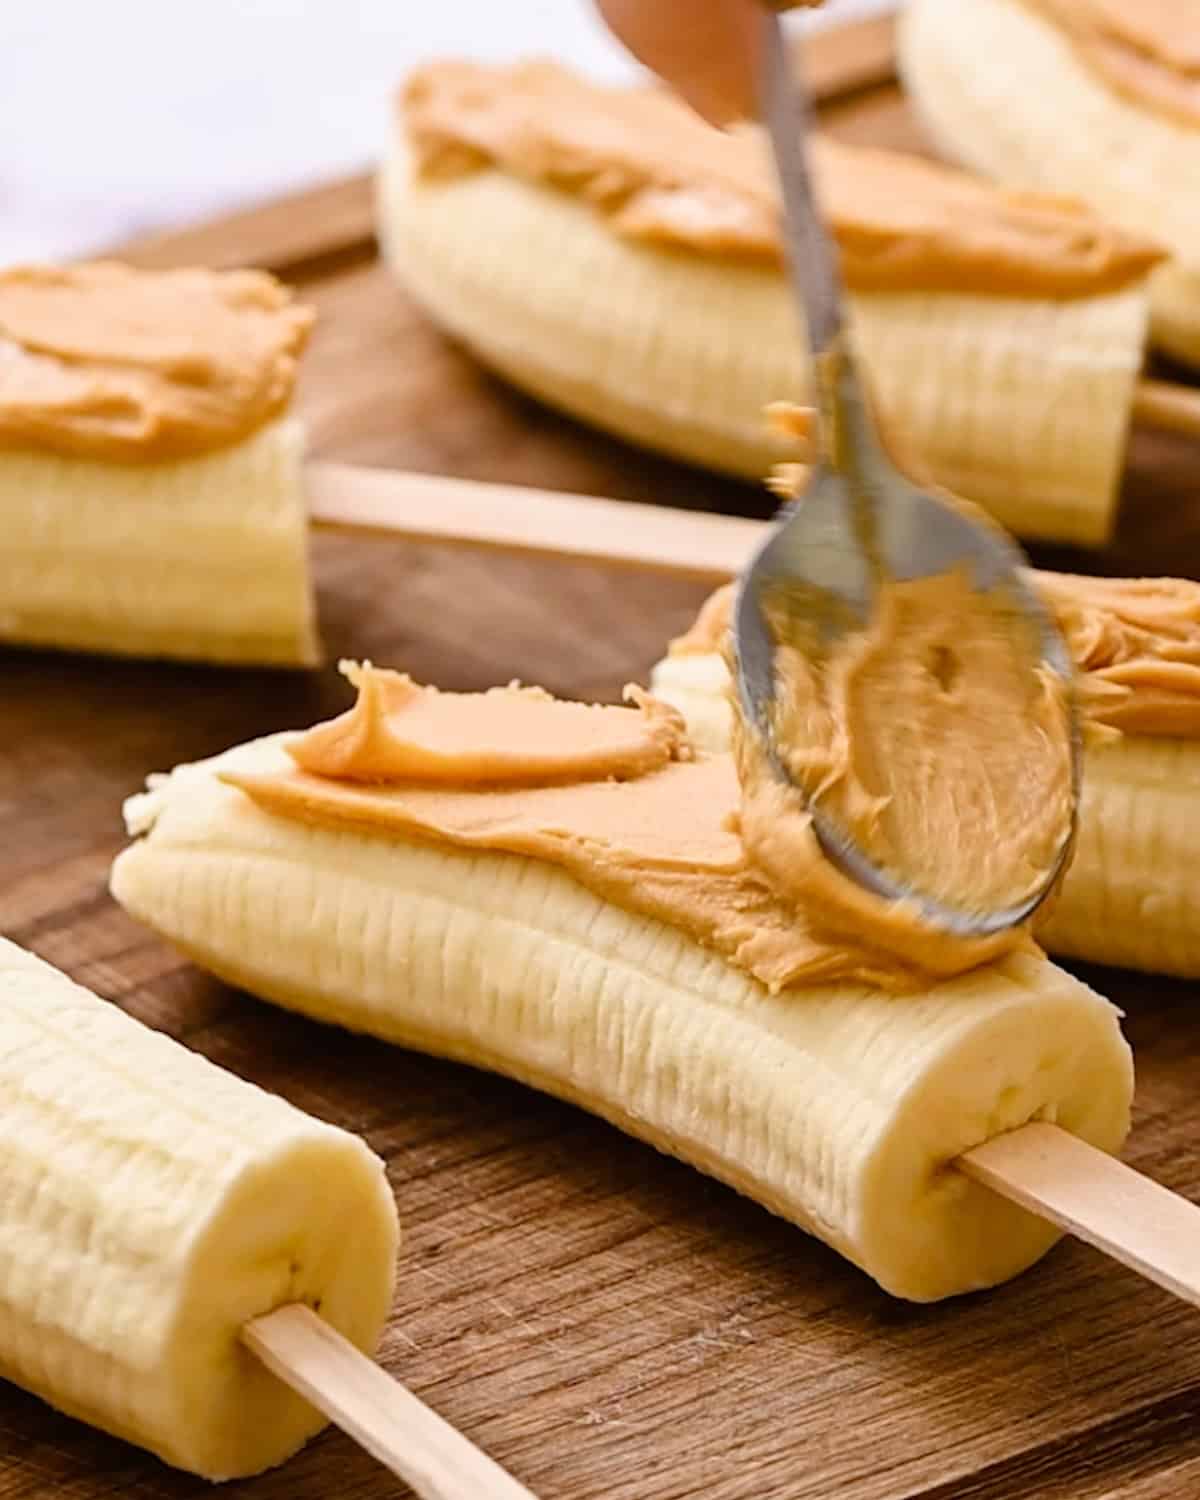 a spoon spreading peanut butter on a half of a banana to make Chocolate Peanut Butter Frozen Bananas